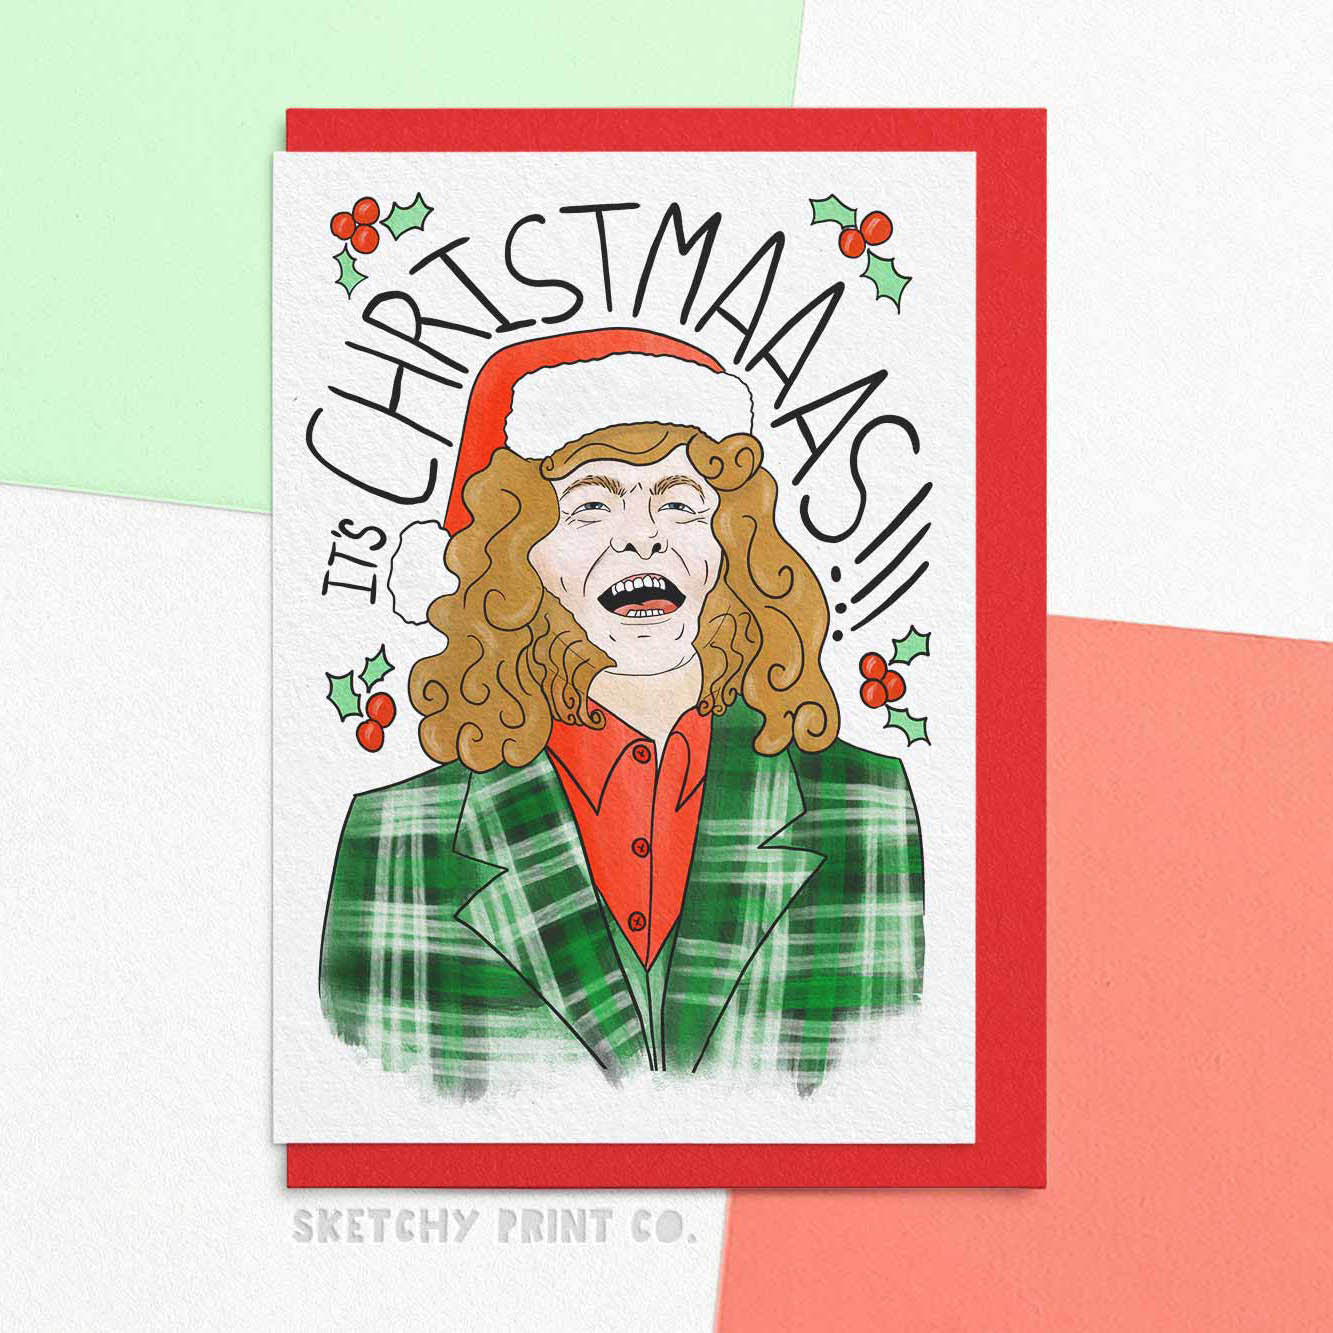 Noddy Funny Christmas Cards boyfriend girlfriend unique gift unusual hilarious illustrated sketchy print co